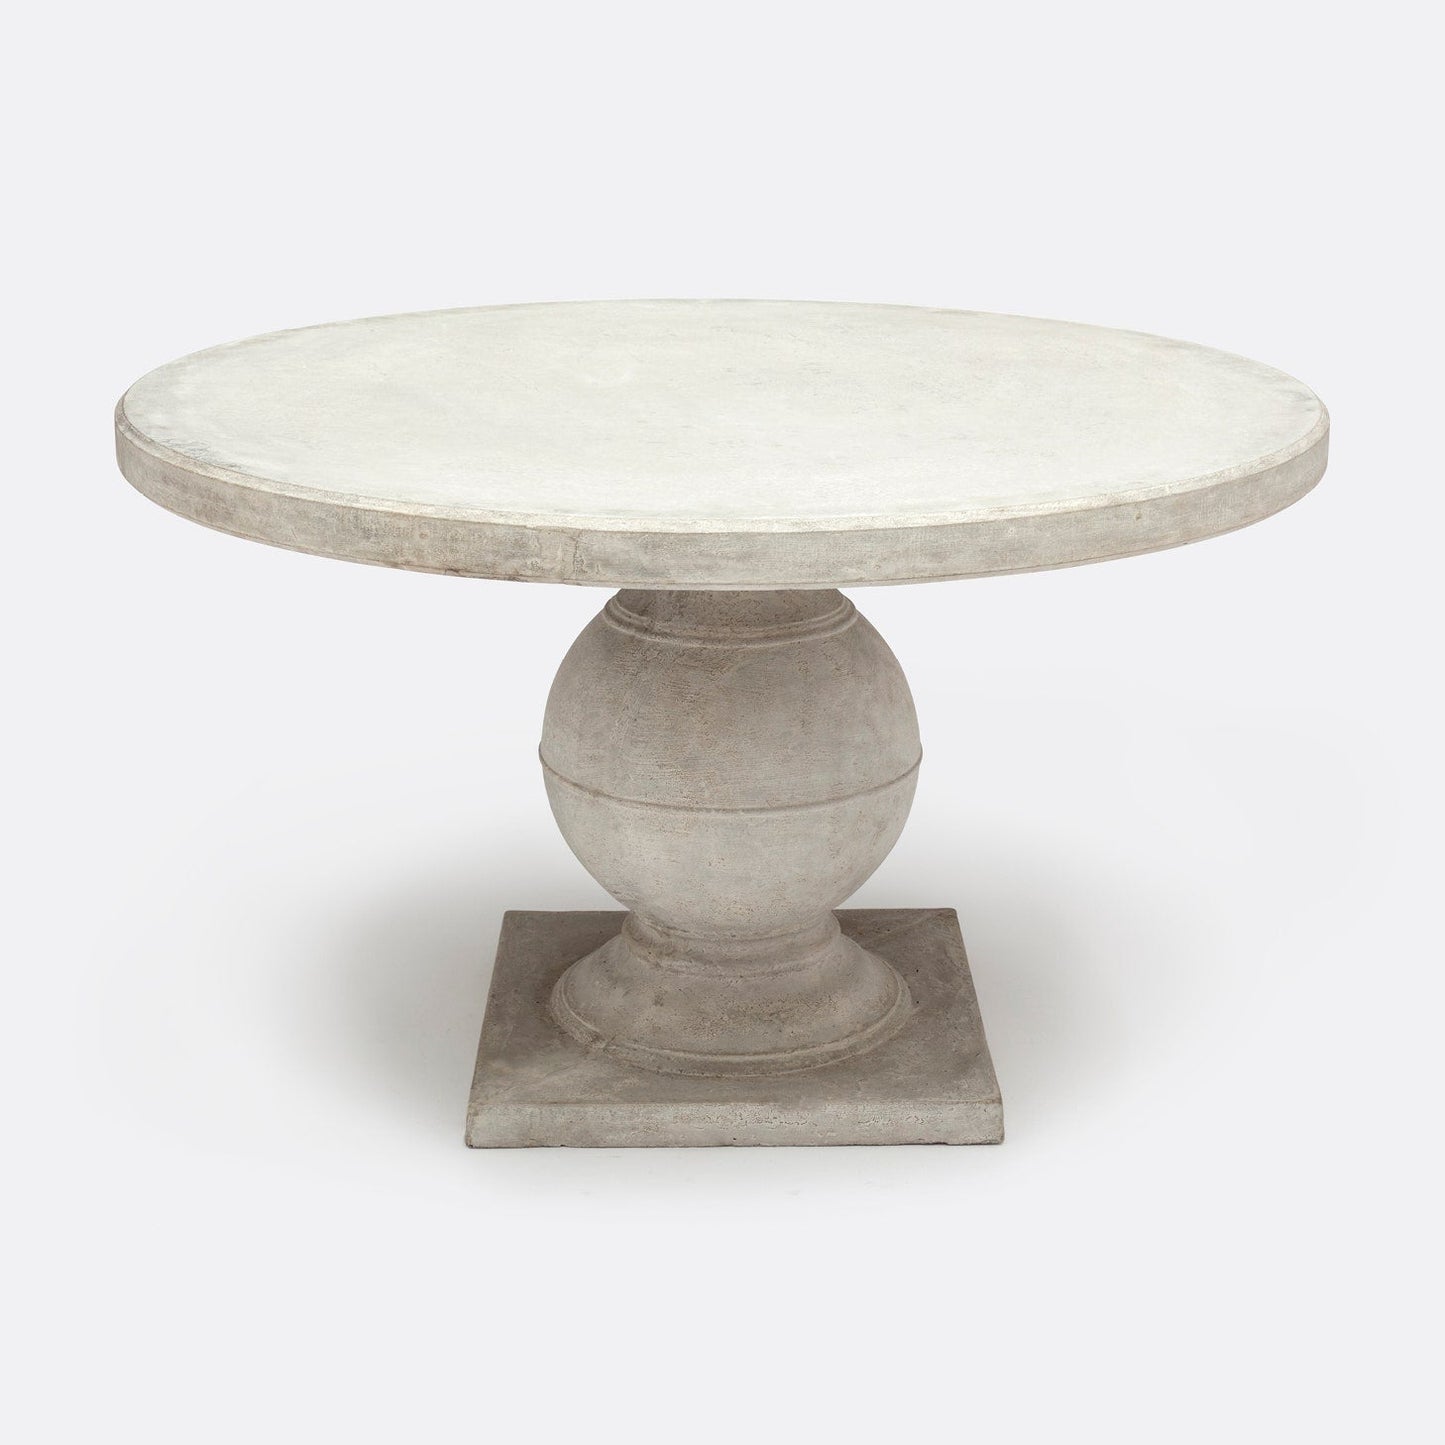 Made Goods Cyril 60" x 30" Light Gray Reconstituted Stone Outdoor Dinning Table With Round Table Top